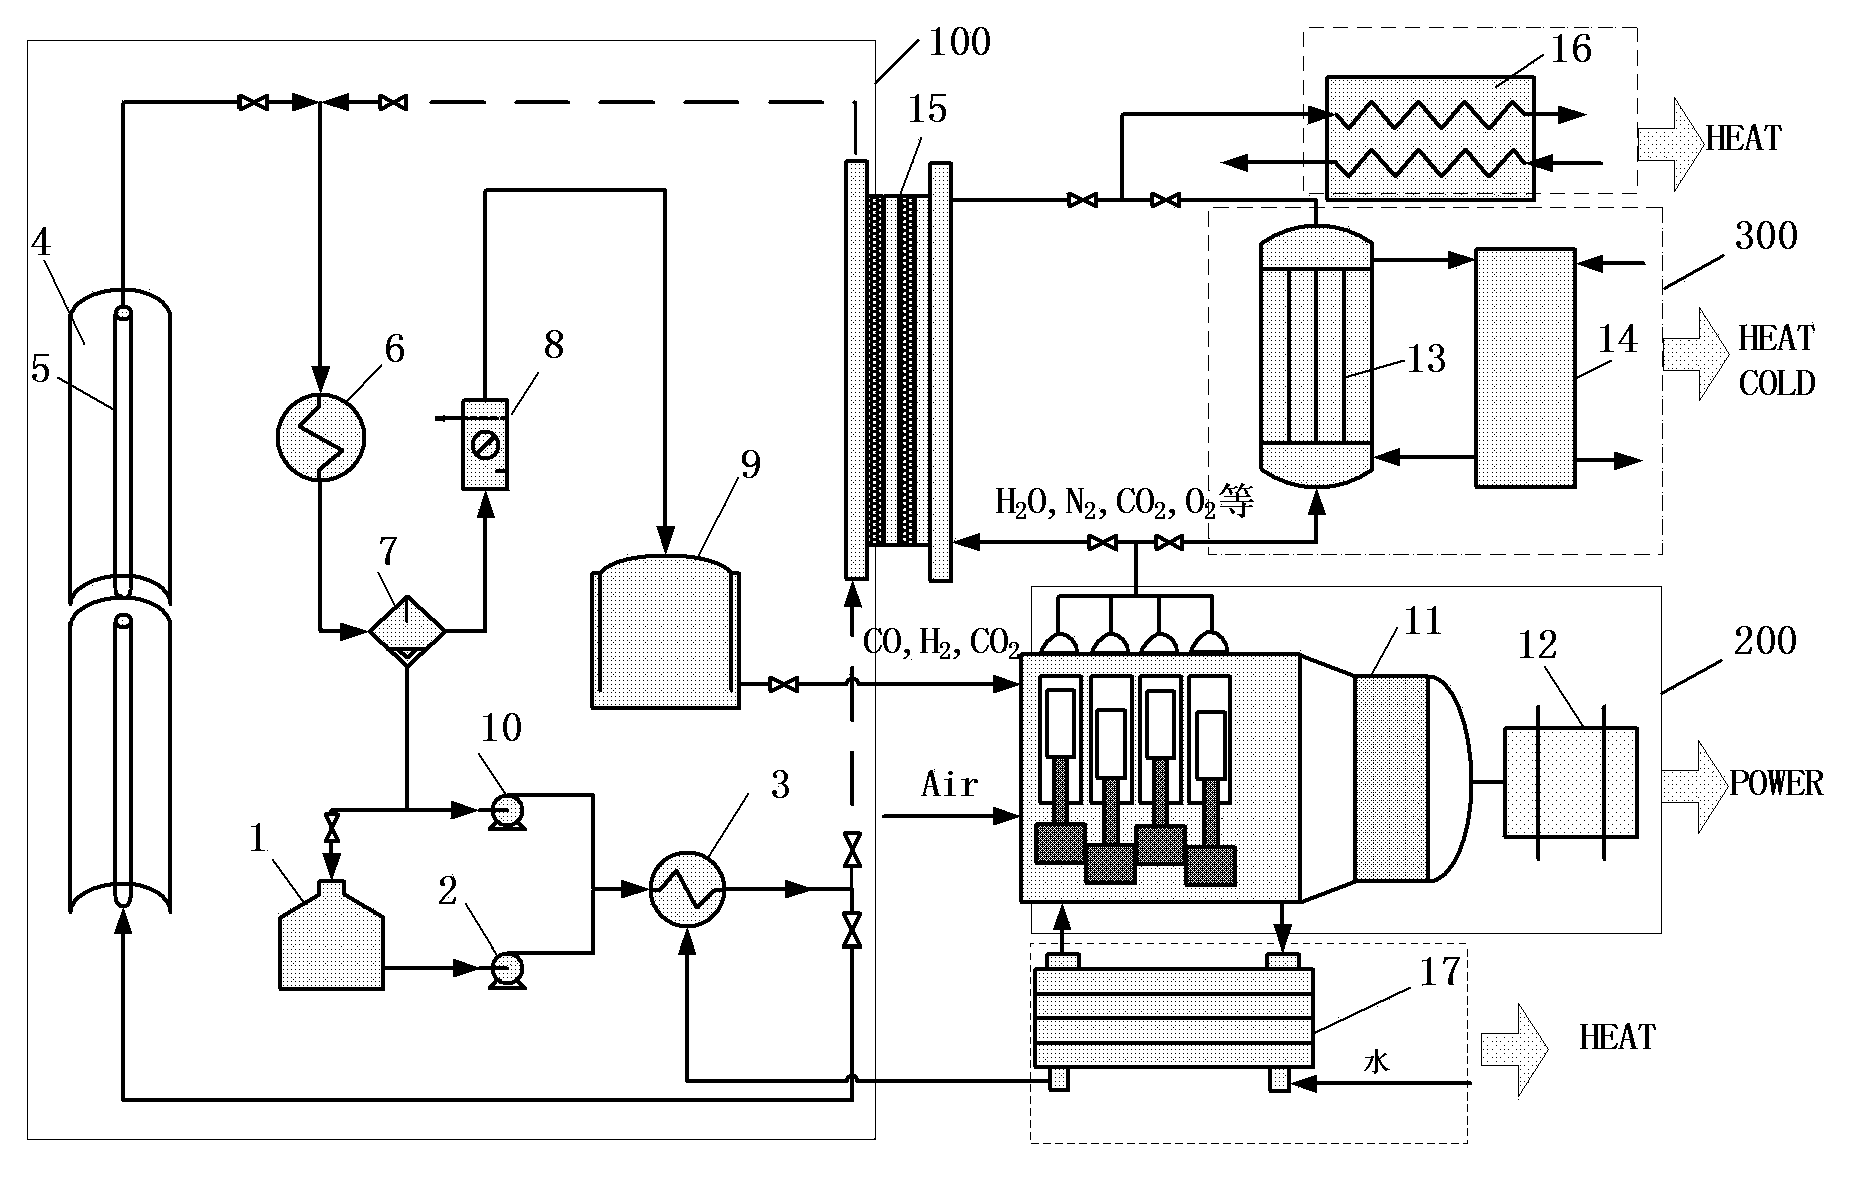 Solar energy and alternative fuel complementary distributed internal combustion engine cooling heating and power system and method